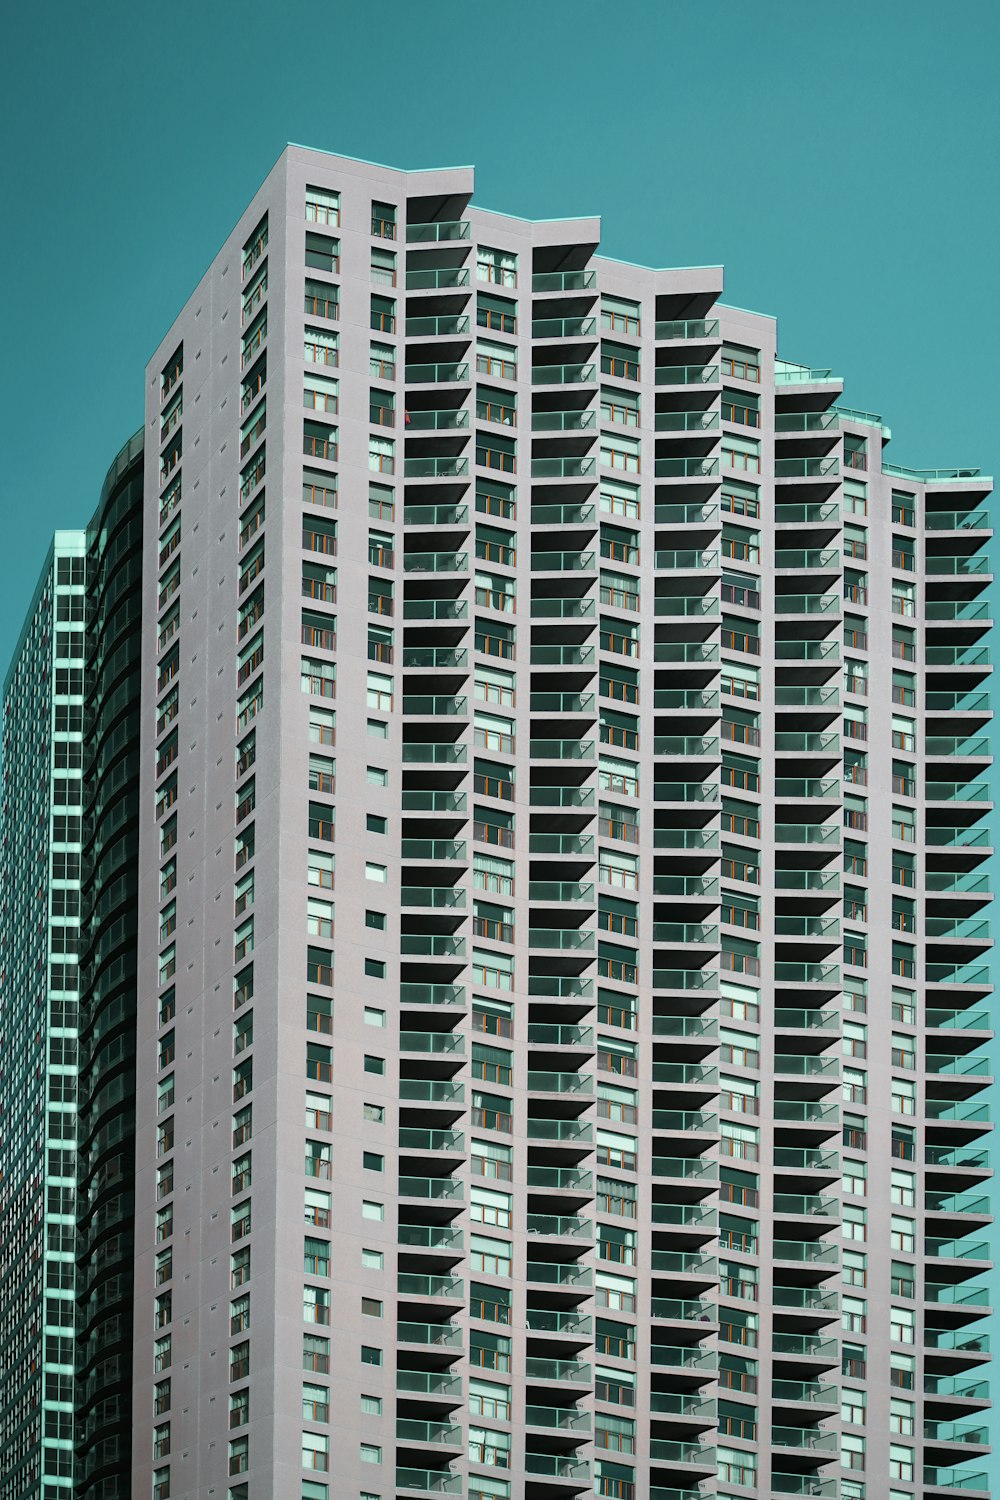 a very tall building with many windows and balconies